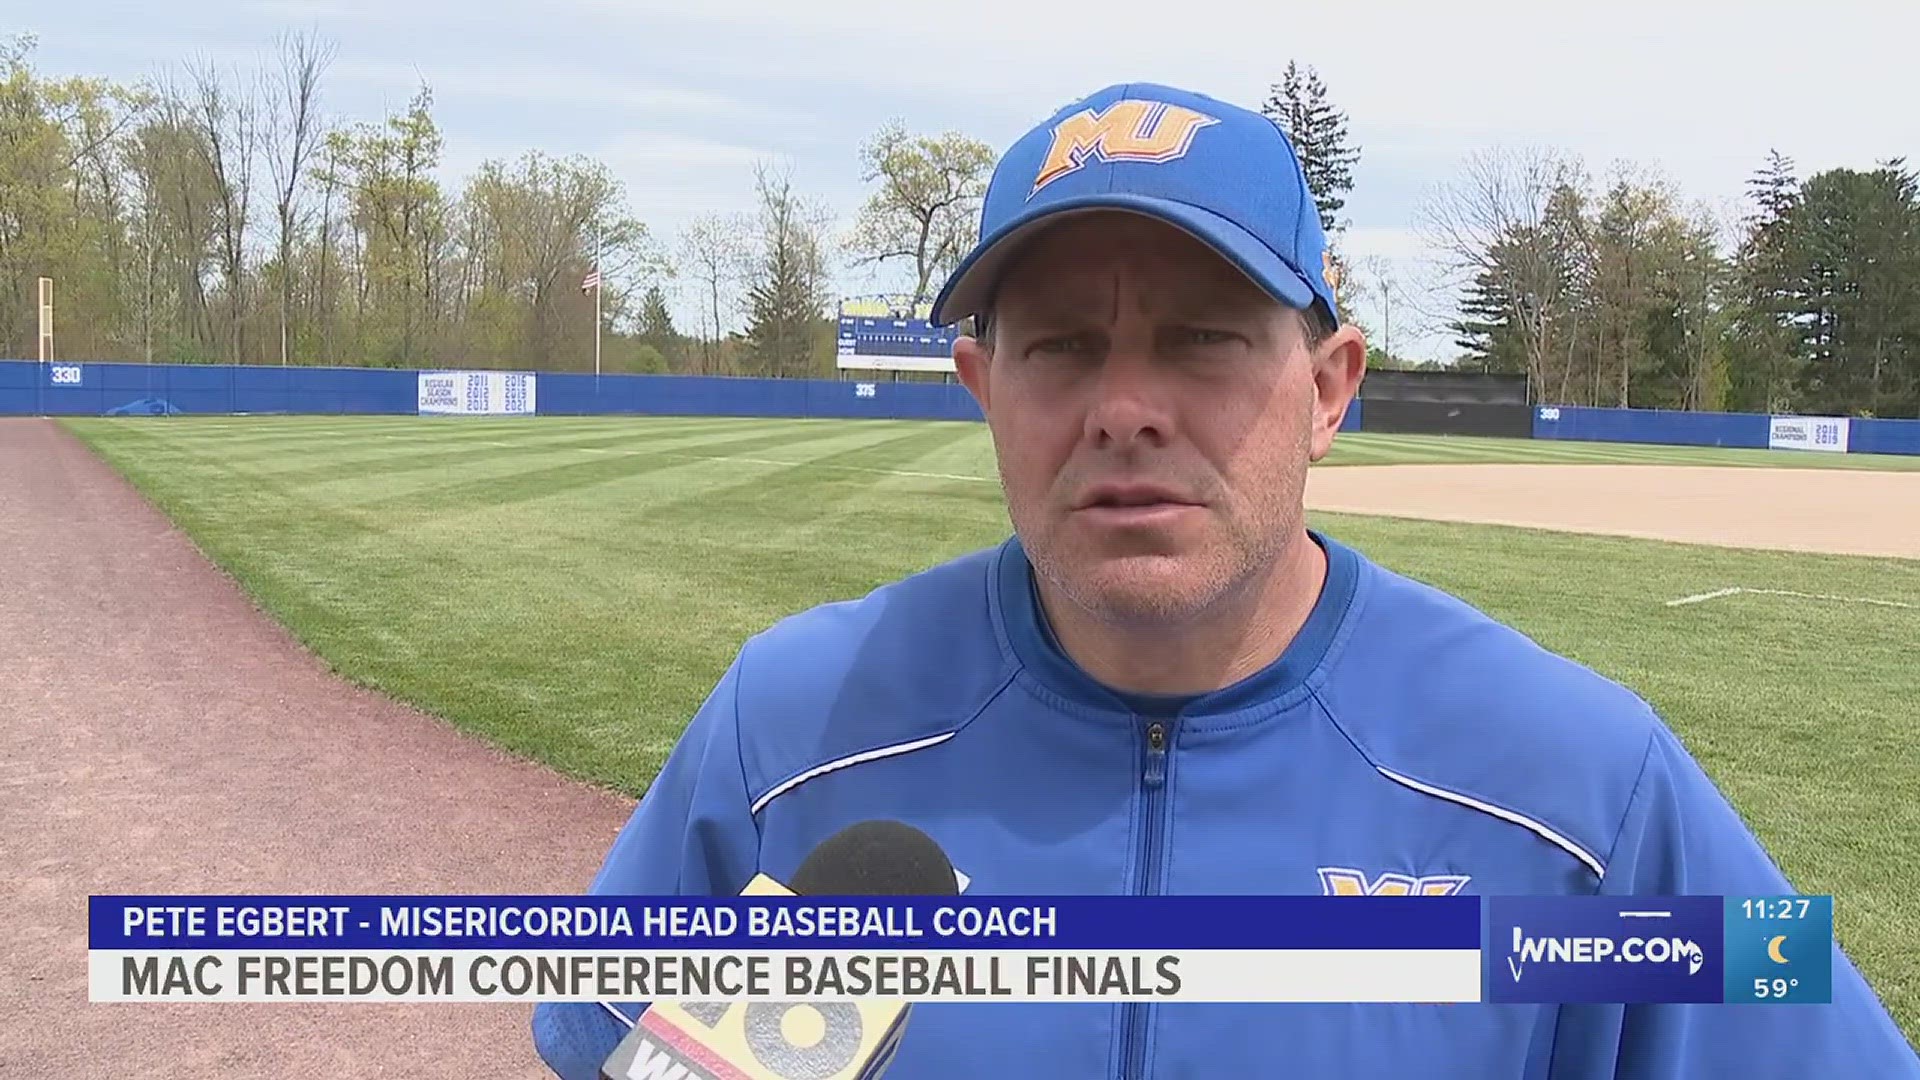 Misericordia is back in the MAC Freedom Conference Championships again